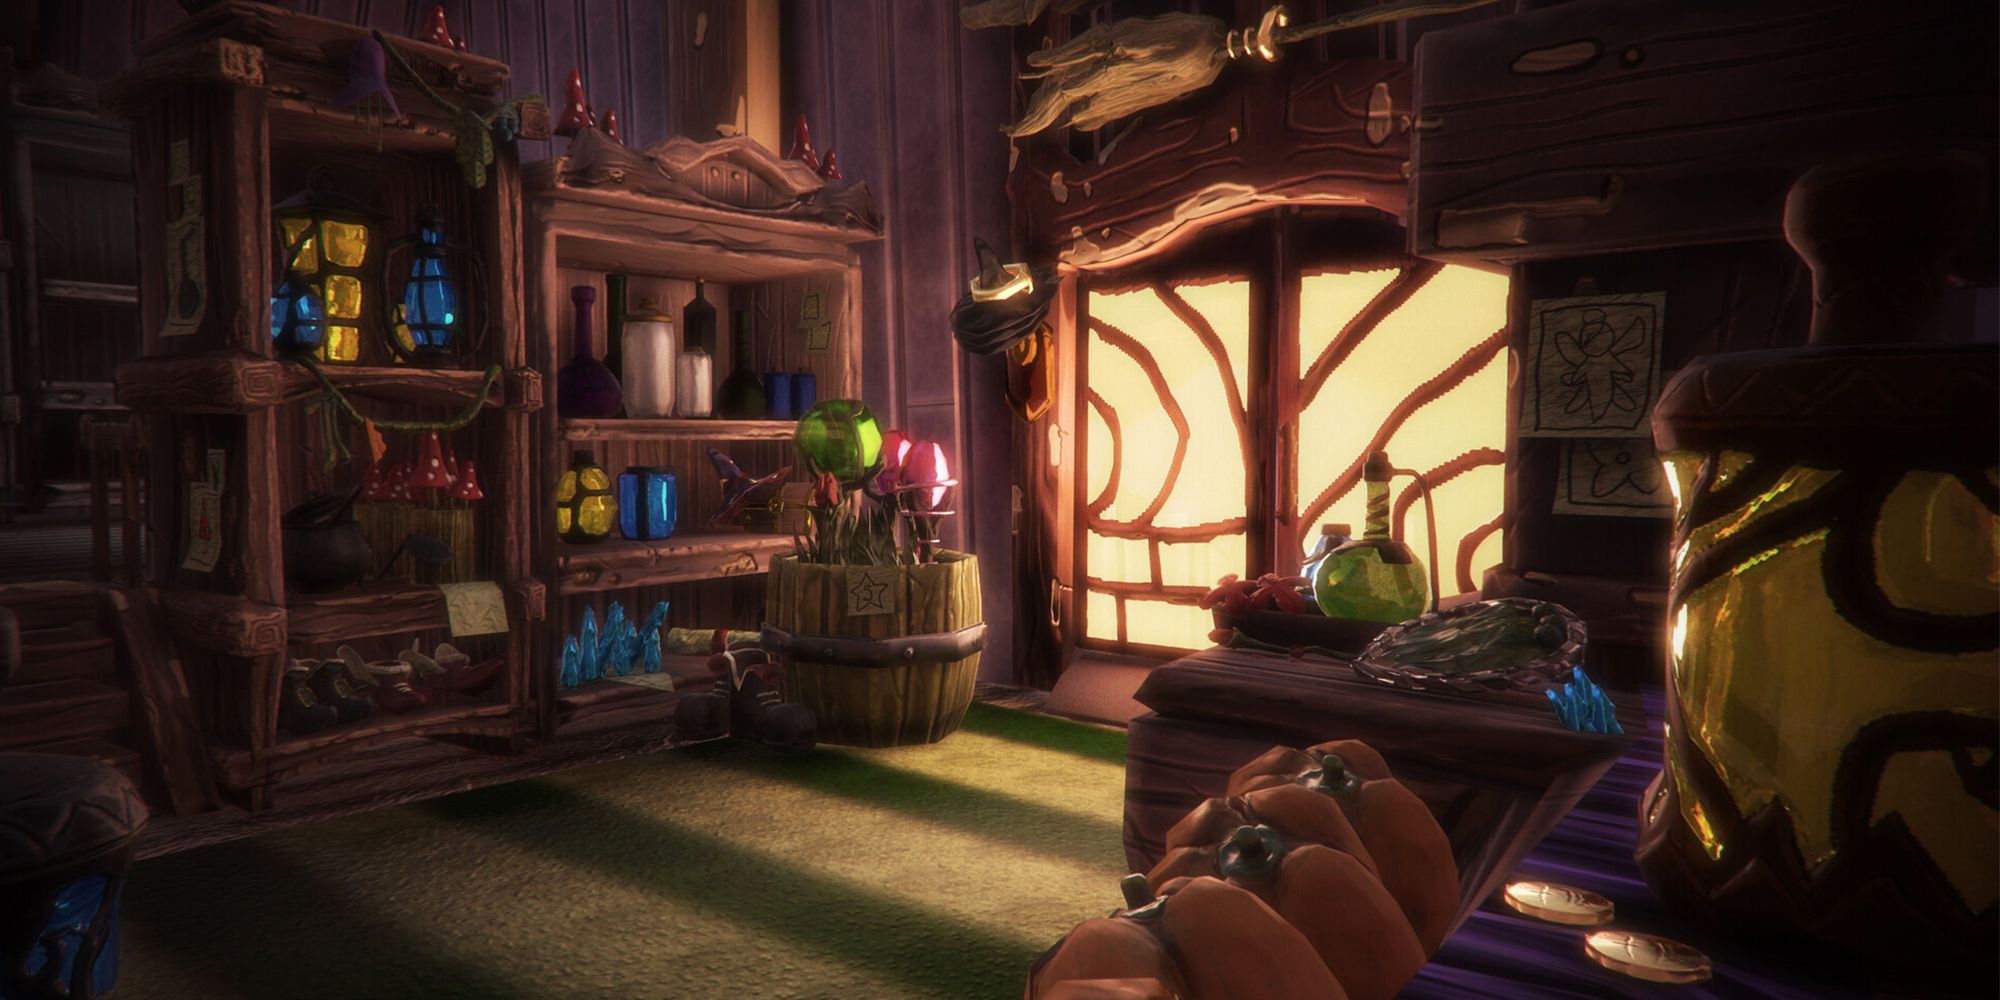 Magic Shop filled with potions, books, and flying brooms